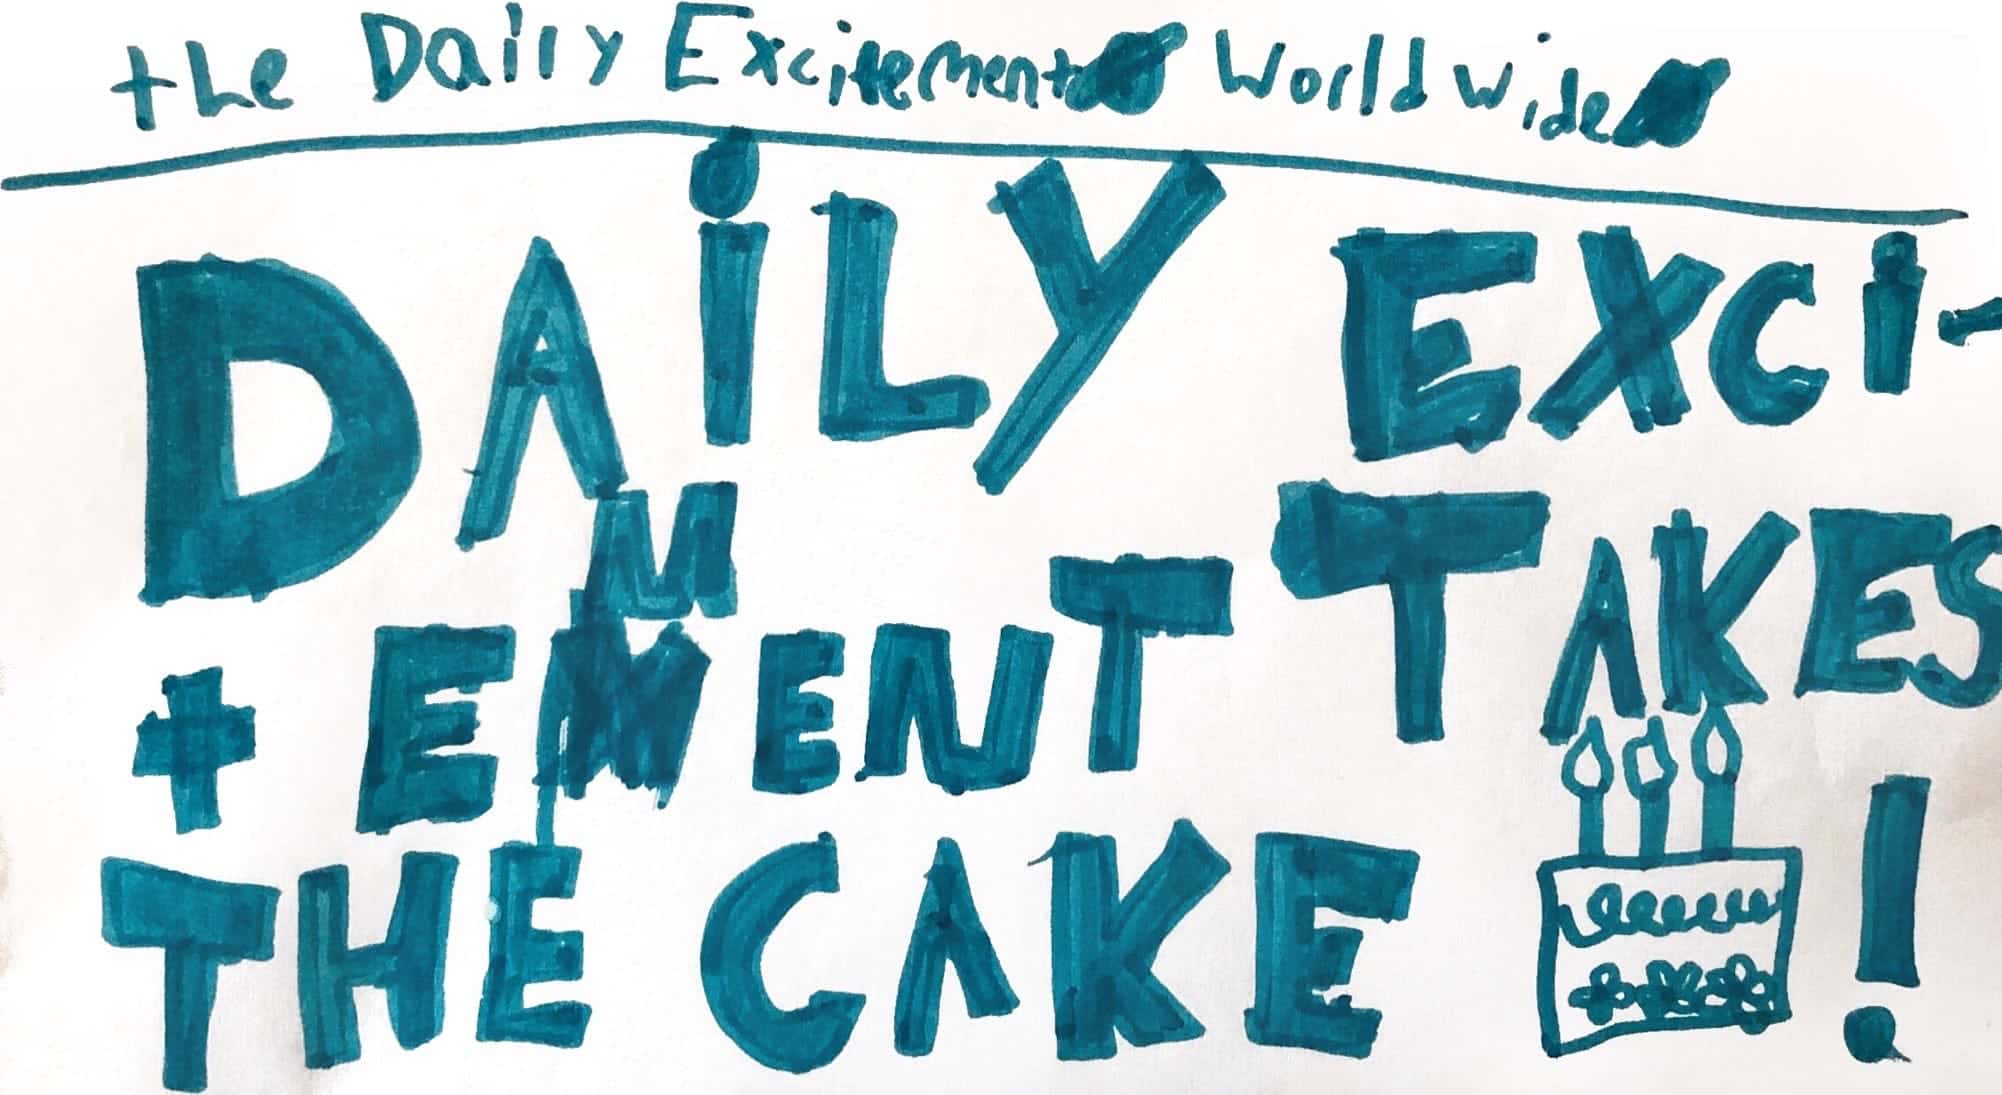 The Daily Excitement Worldwide: Daily Excitement Takes The Cake!